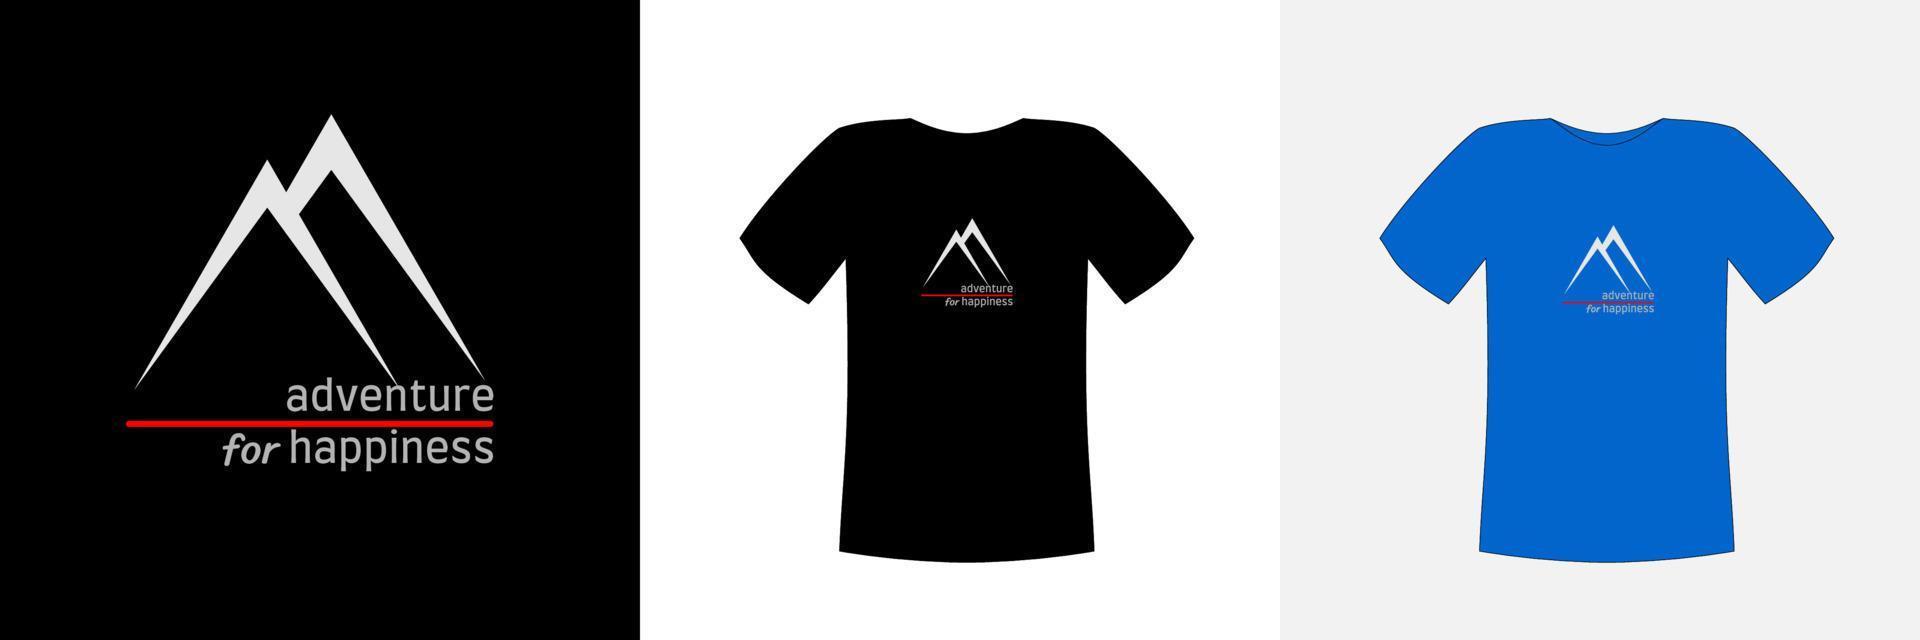 T-shirt design vector, with a white two mountains illustration shape on a dark cloth with the text adventure for happiness, can be adjusted for different background colors vector